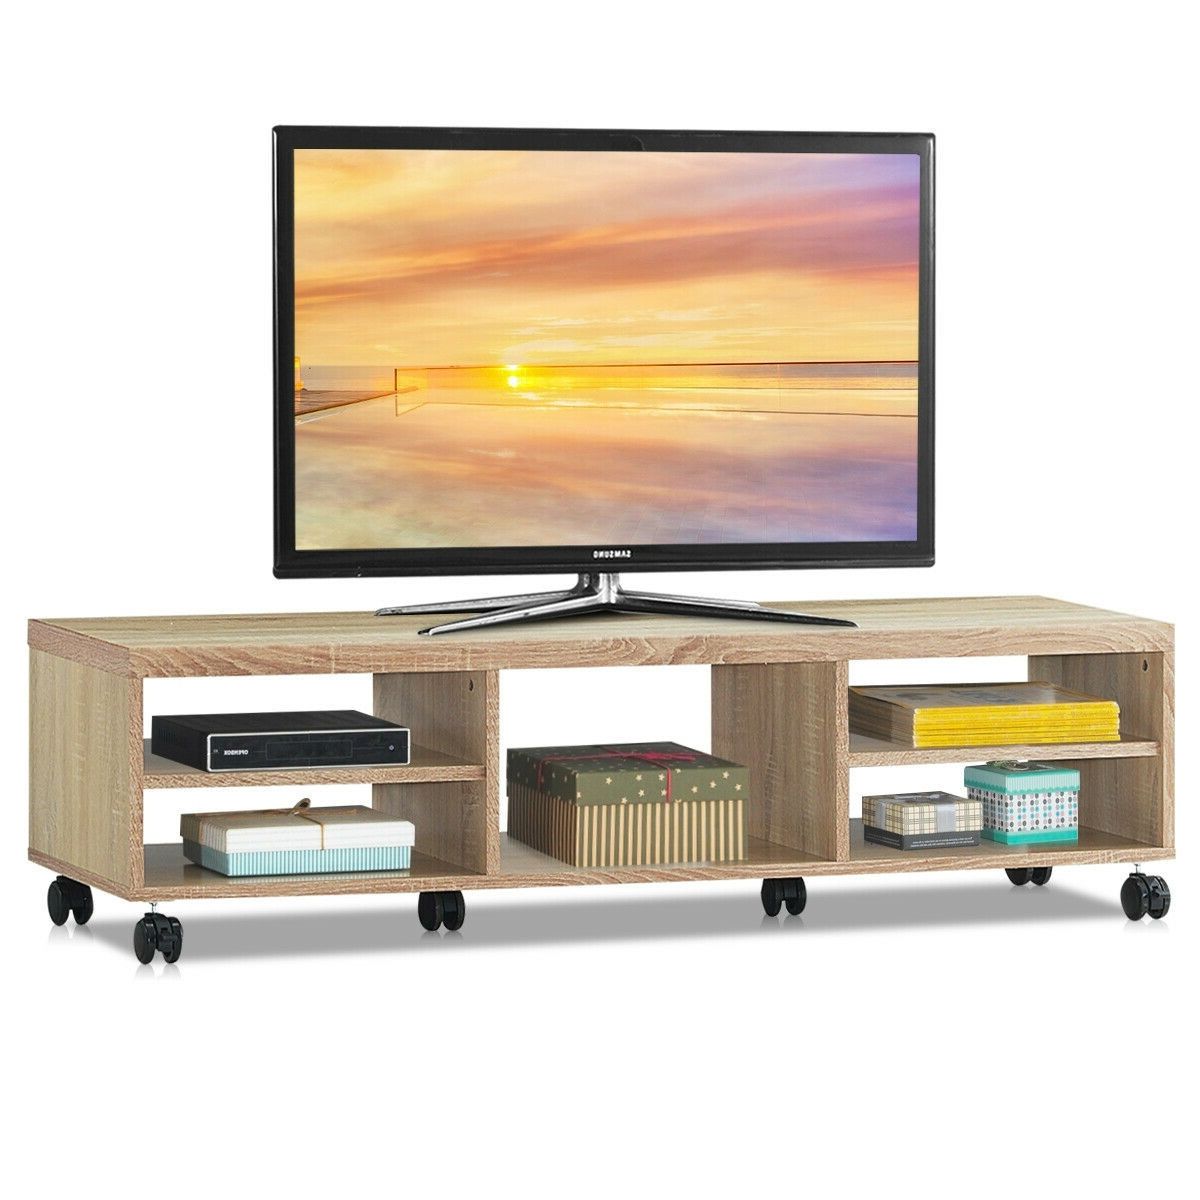 Rolling 60 Inch Tv Stand In Natural Wood Finish With 6 Wheel Inside Modern Rolling Tv Stands (View 20 of 20)